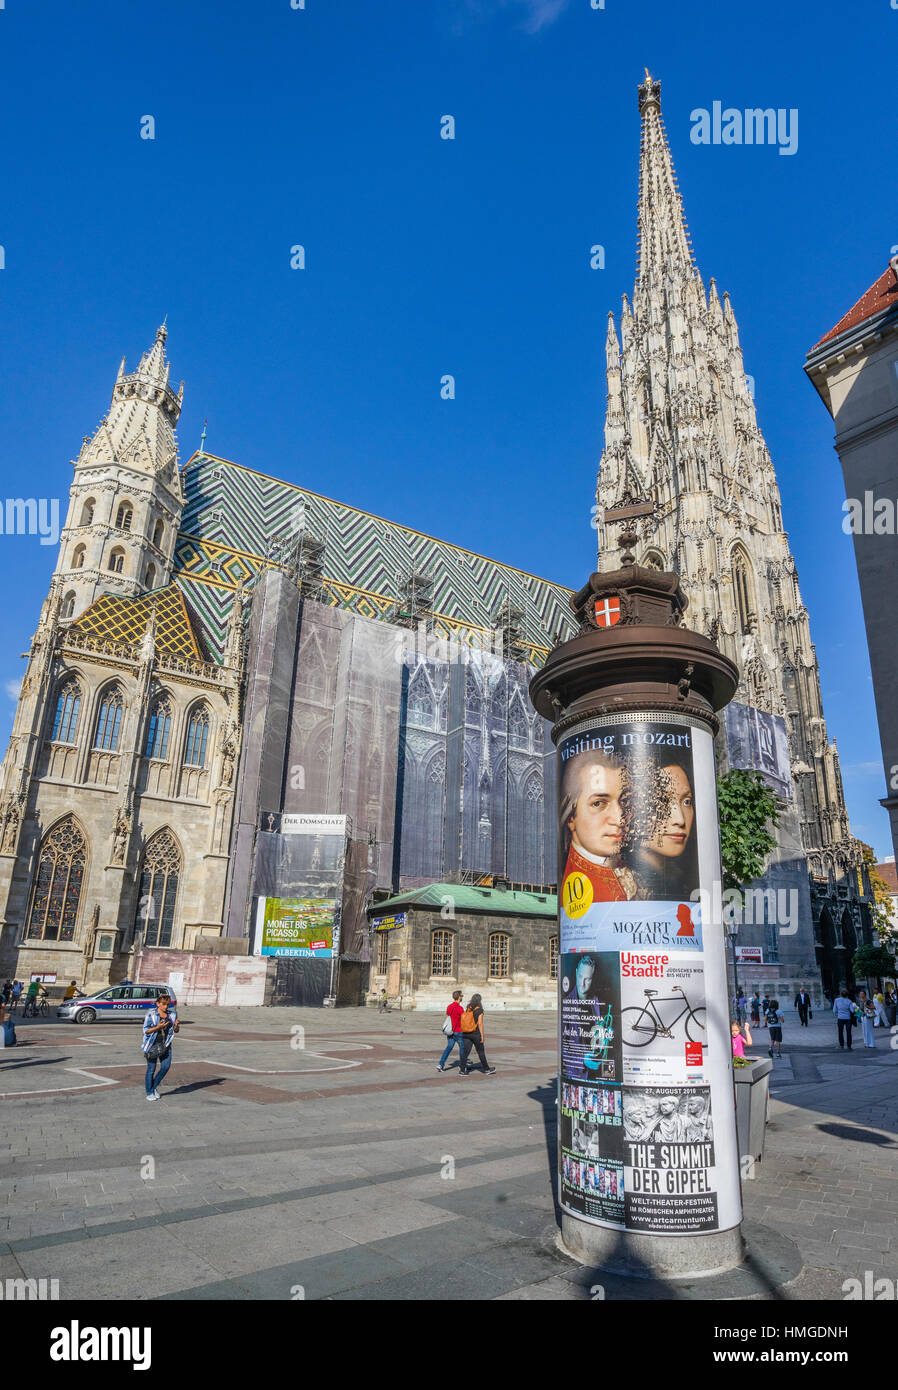 Austria, Vienna, Stephansplatz, skillfully disguised conservation and restauration effords at St. Stephen's Cathedral (Stephansdom) Stock Photo